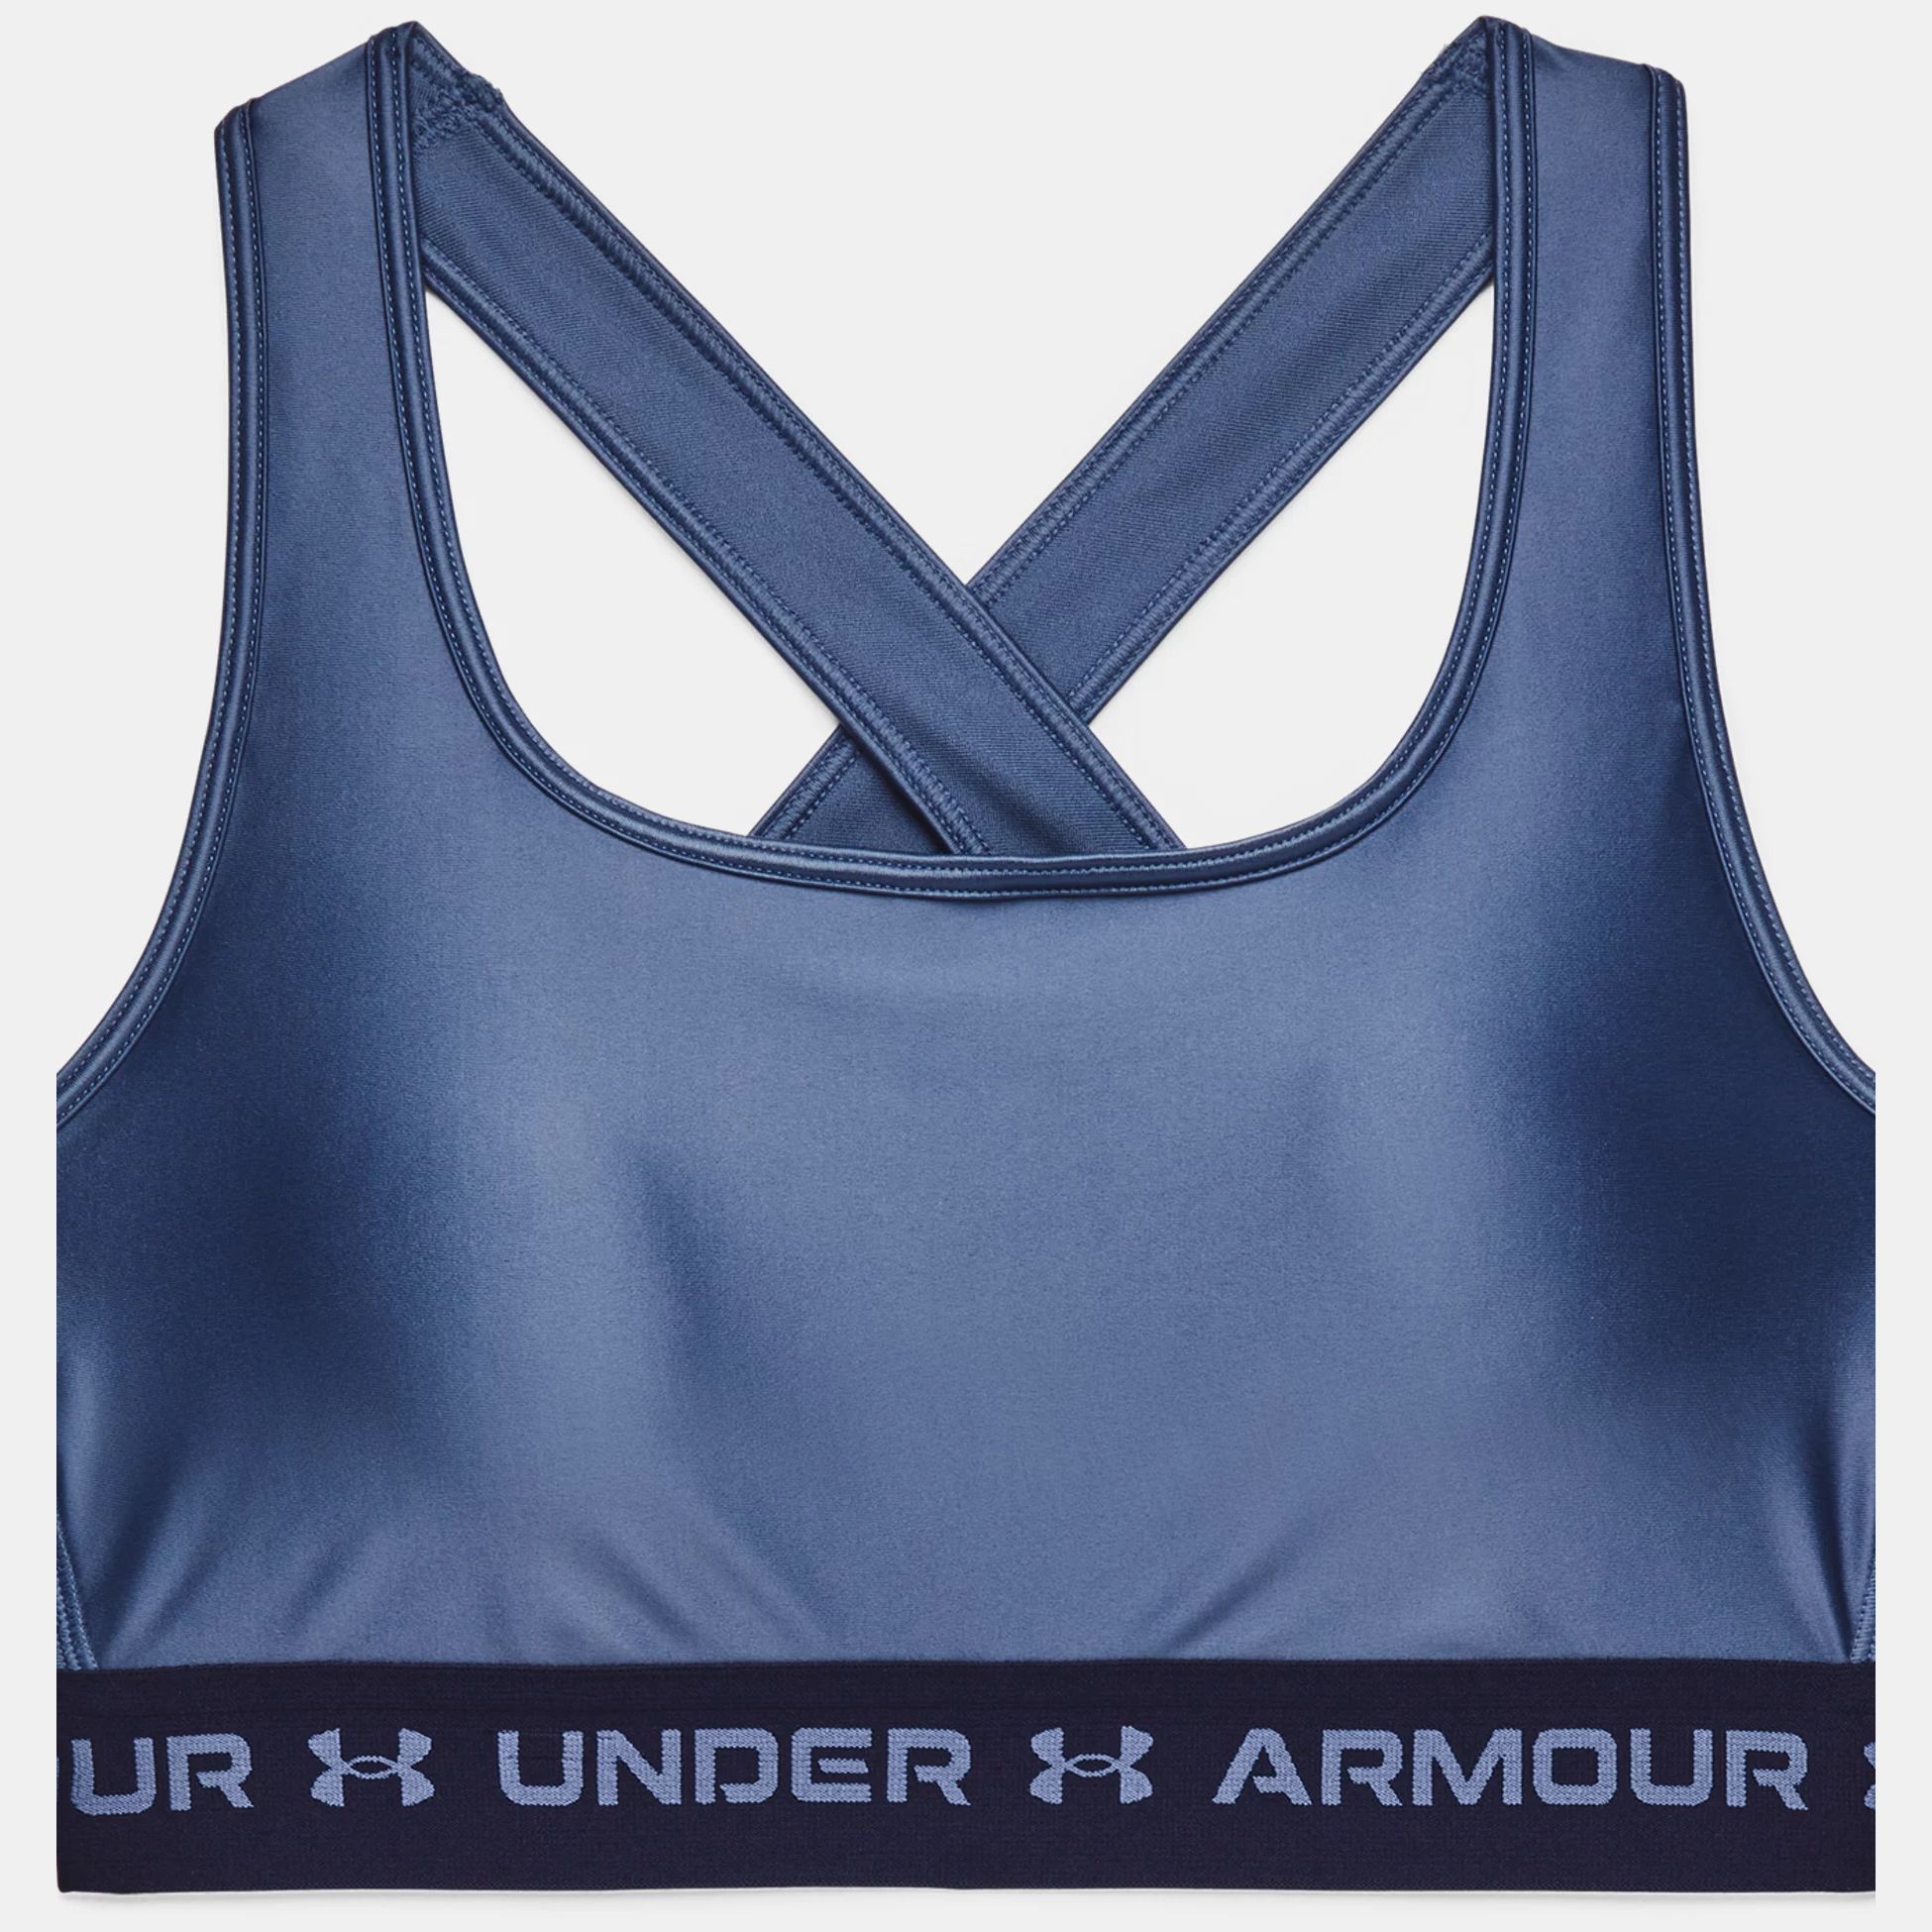 Bustiere -  under armour Armour Mid Crossback Matte/Shine Sports Bra 2612